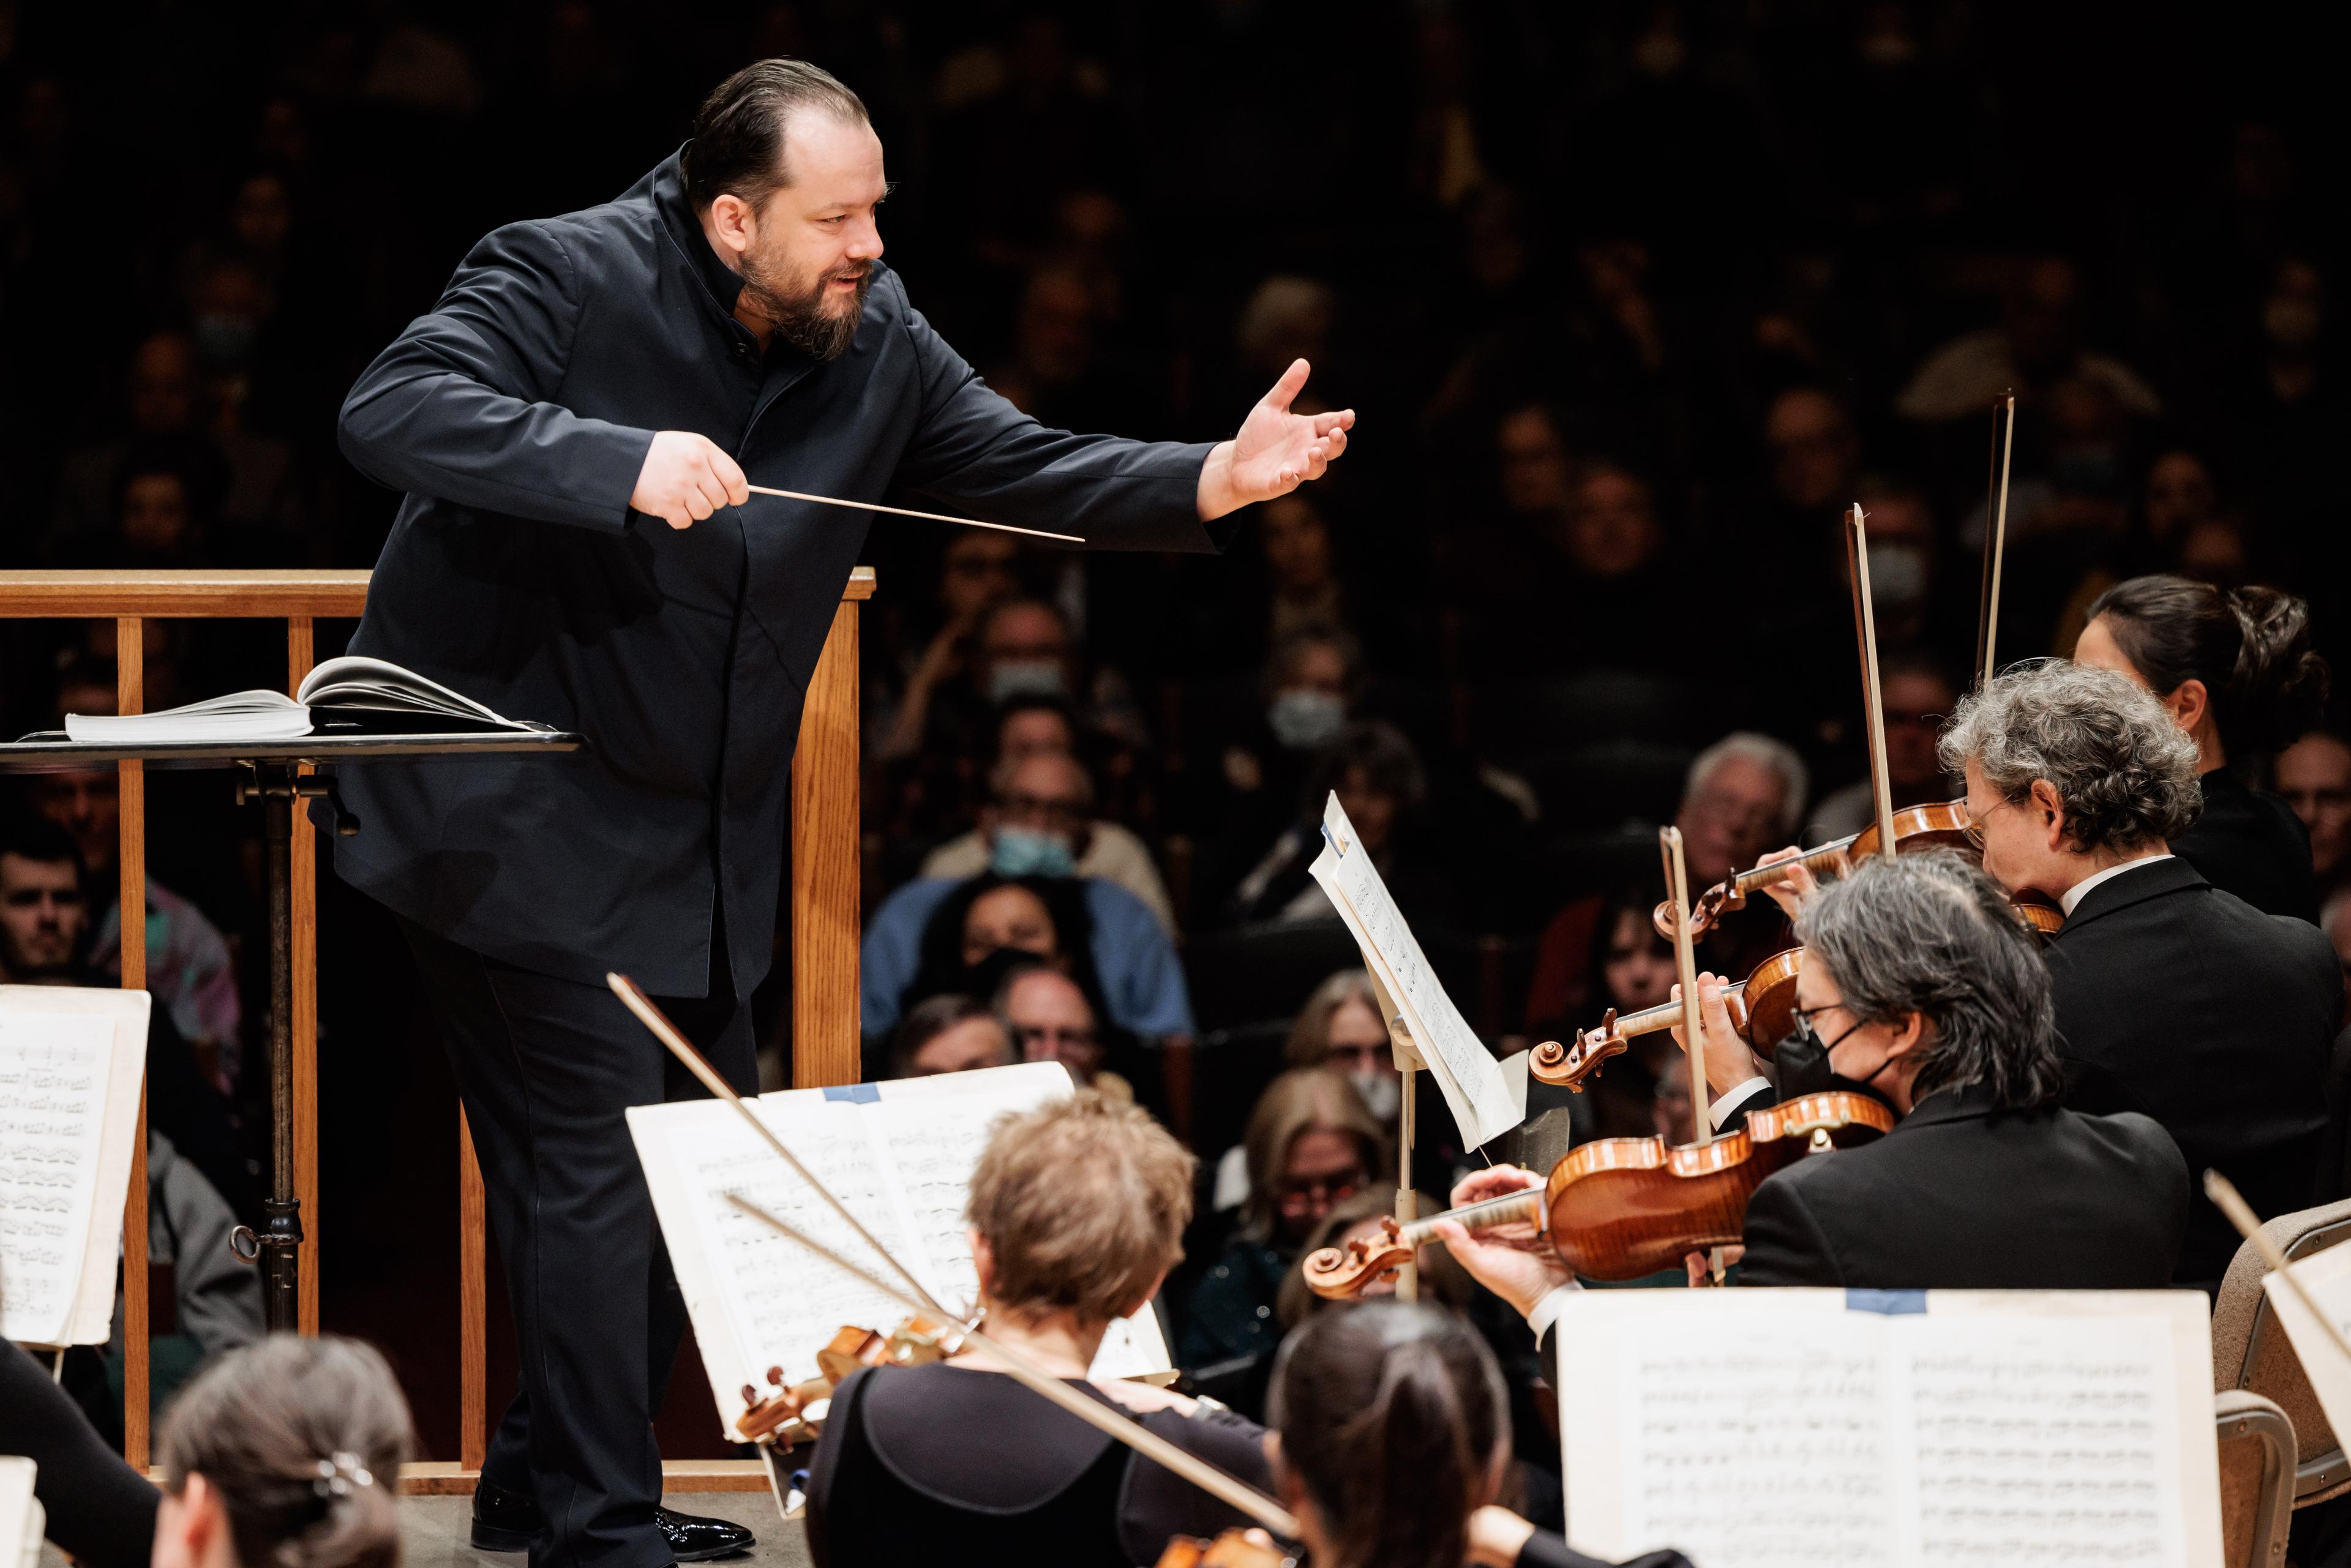 Andris Nelsons conducting the orchestra on stage